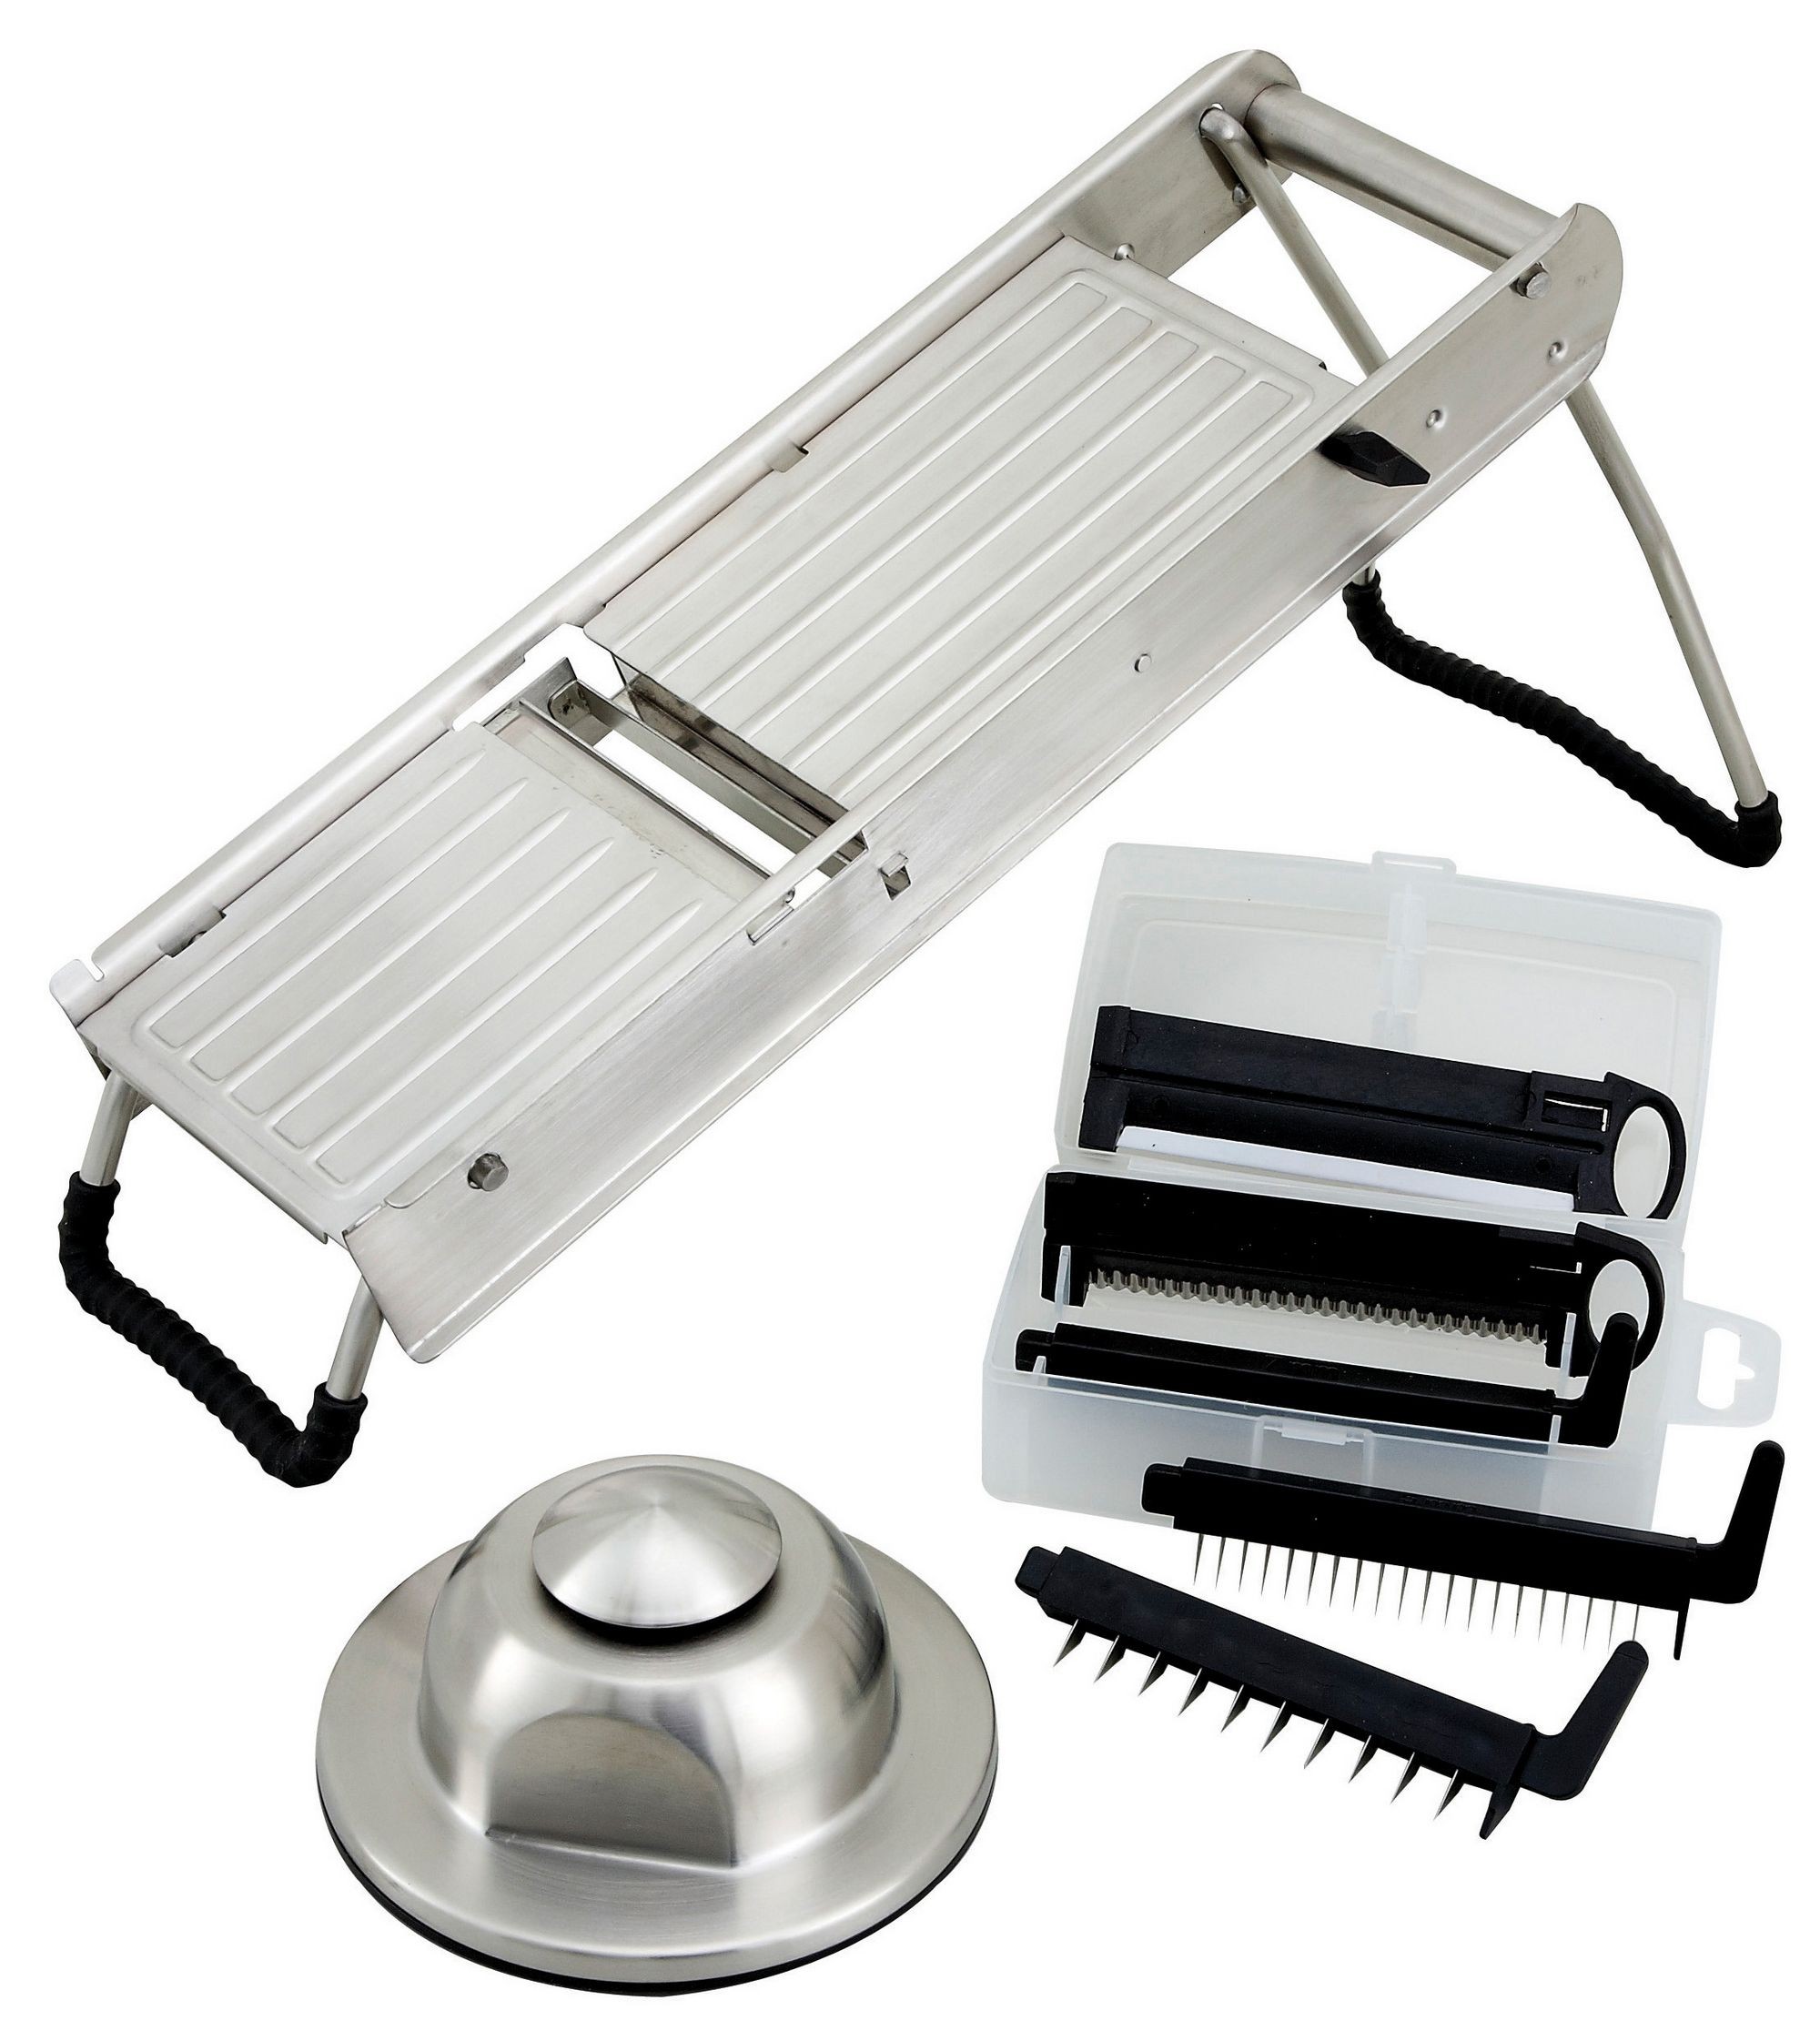 ZKIRON Multi Handheld Mandoline Slicer - Adjustable Stainless Steel Blade,  Comfort Grip, Safety Features, Easy to Clean, Ideal for Speedy Slicing of